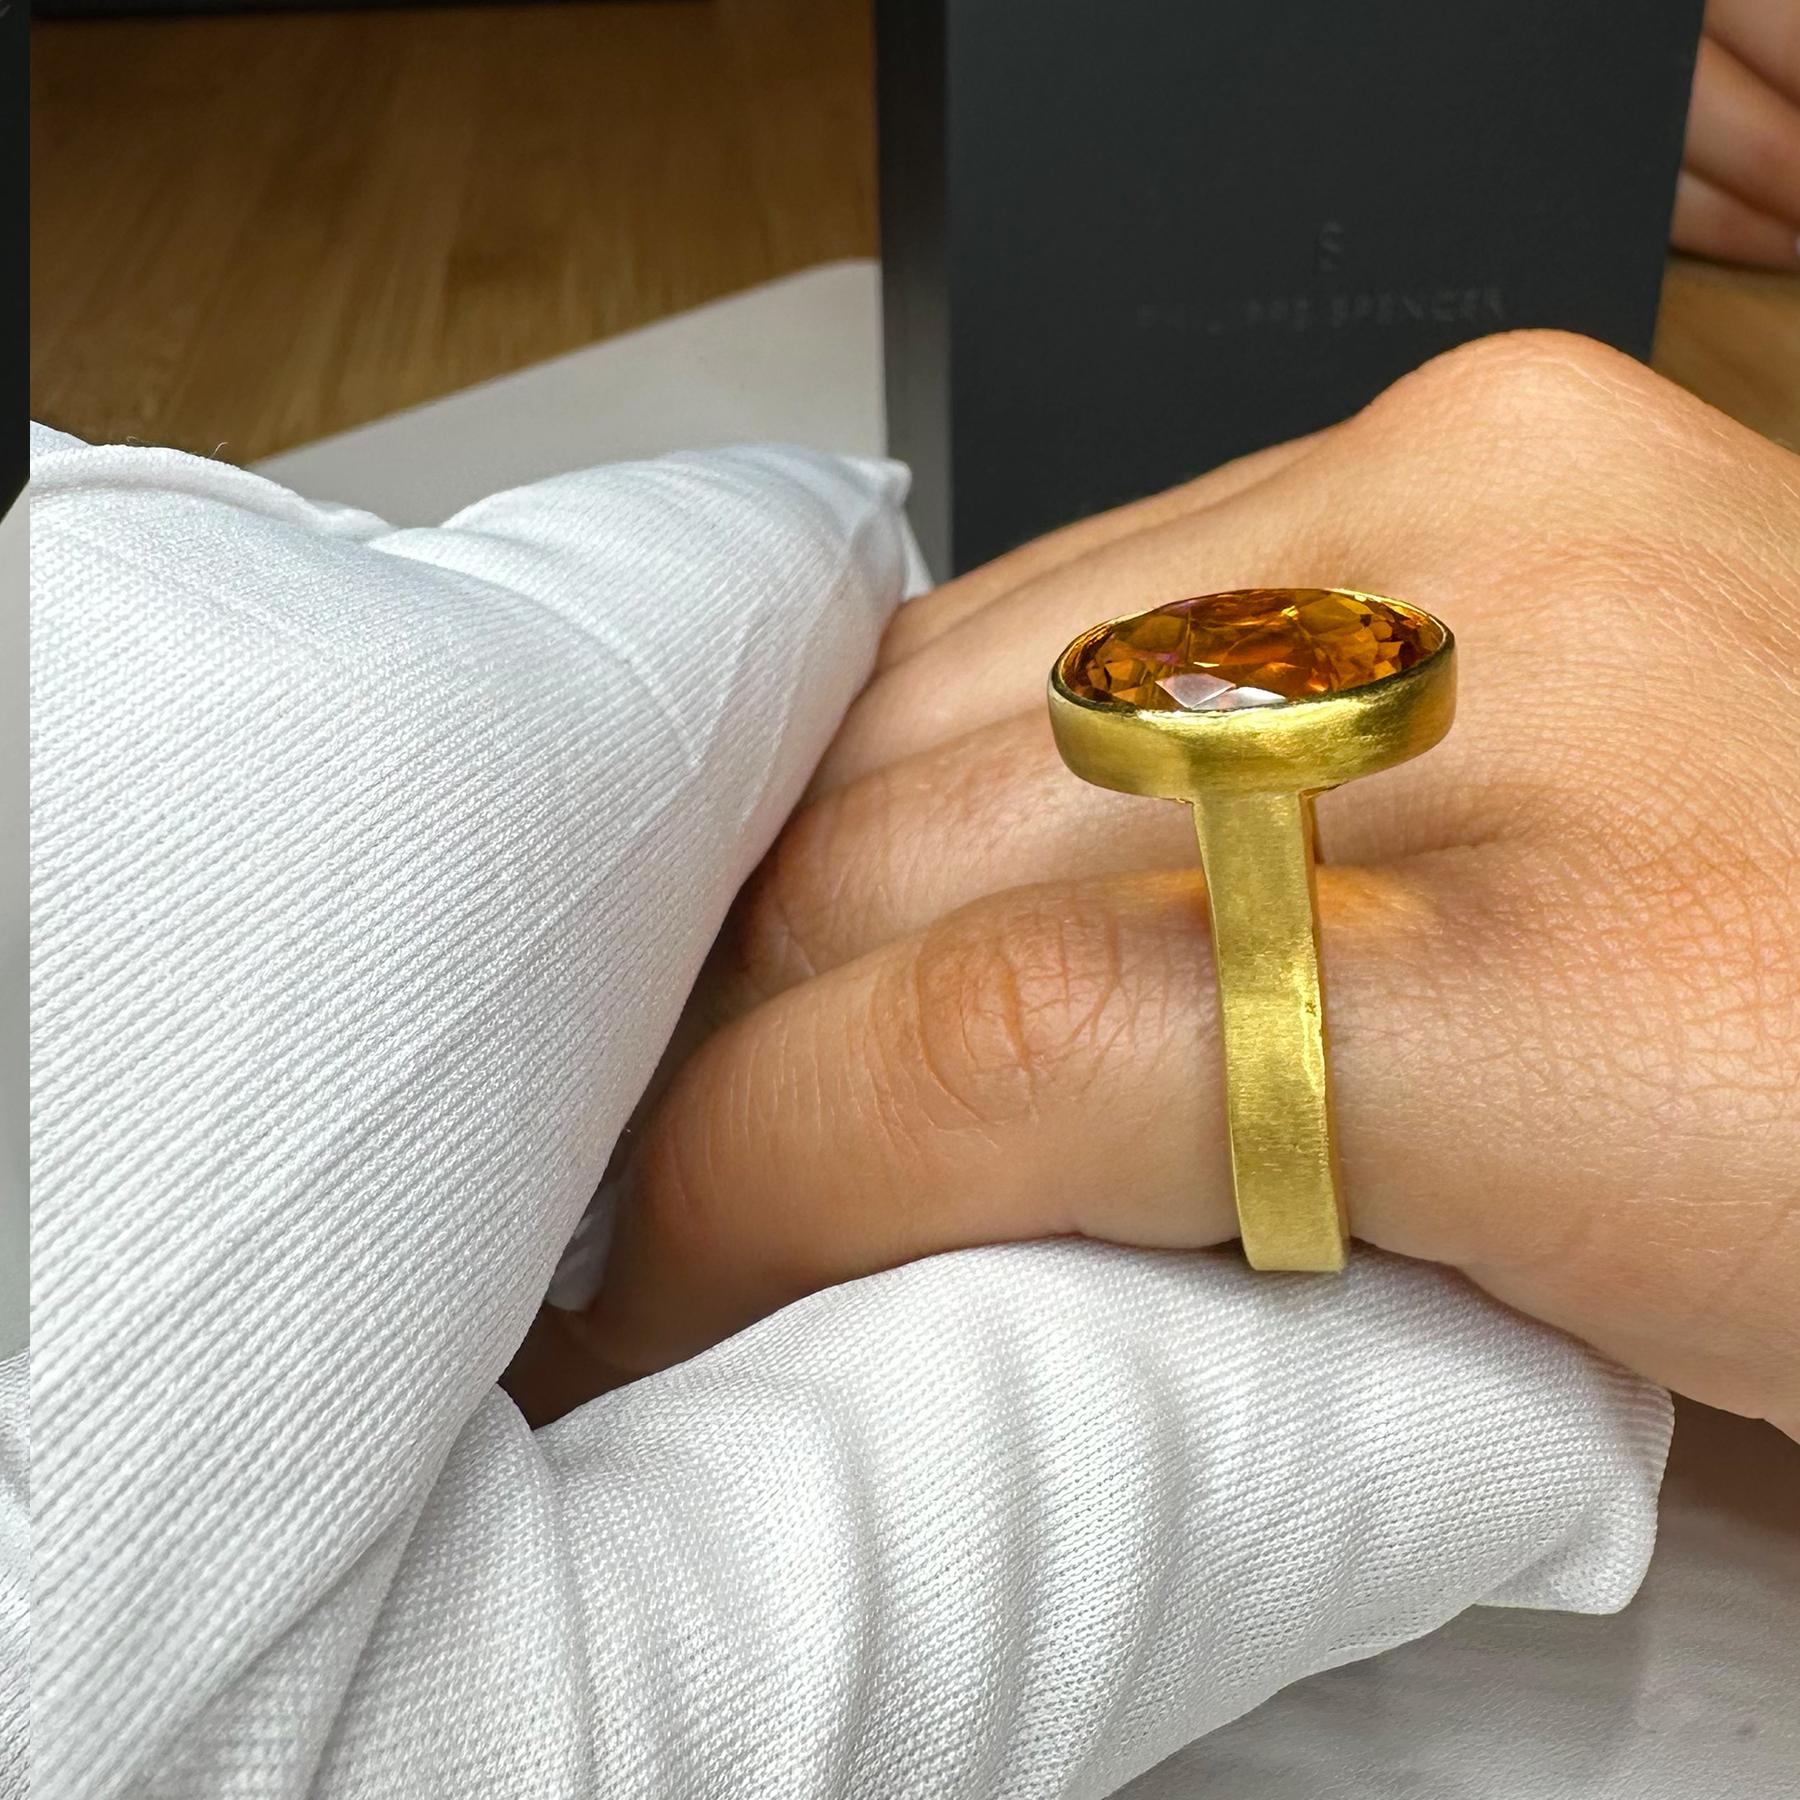 PHILIPPE SPENCER 14.04 Ct. Gold Citrine in 22K and 20K Gold Statement Ring 1